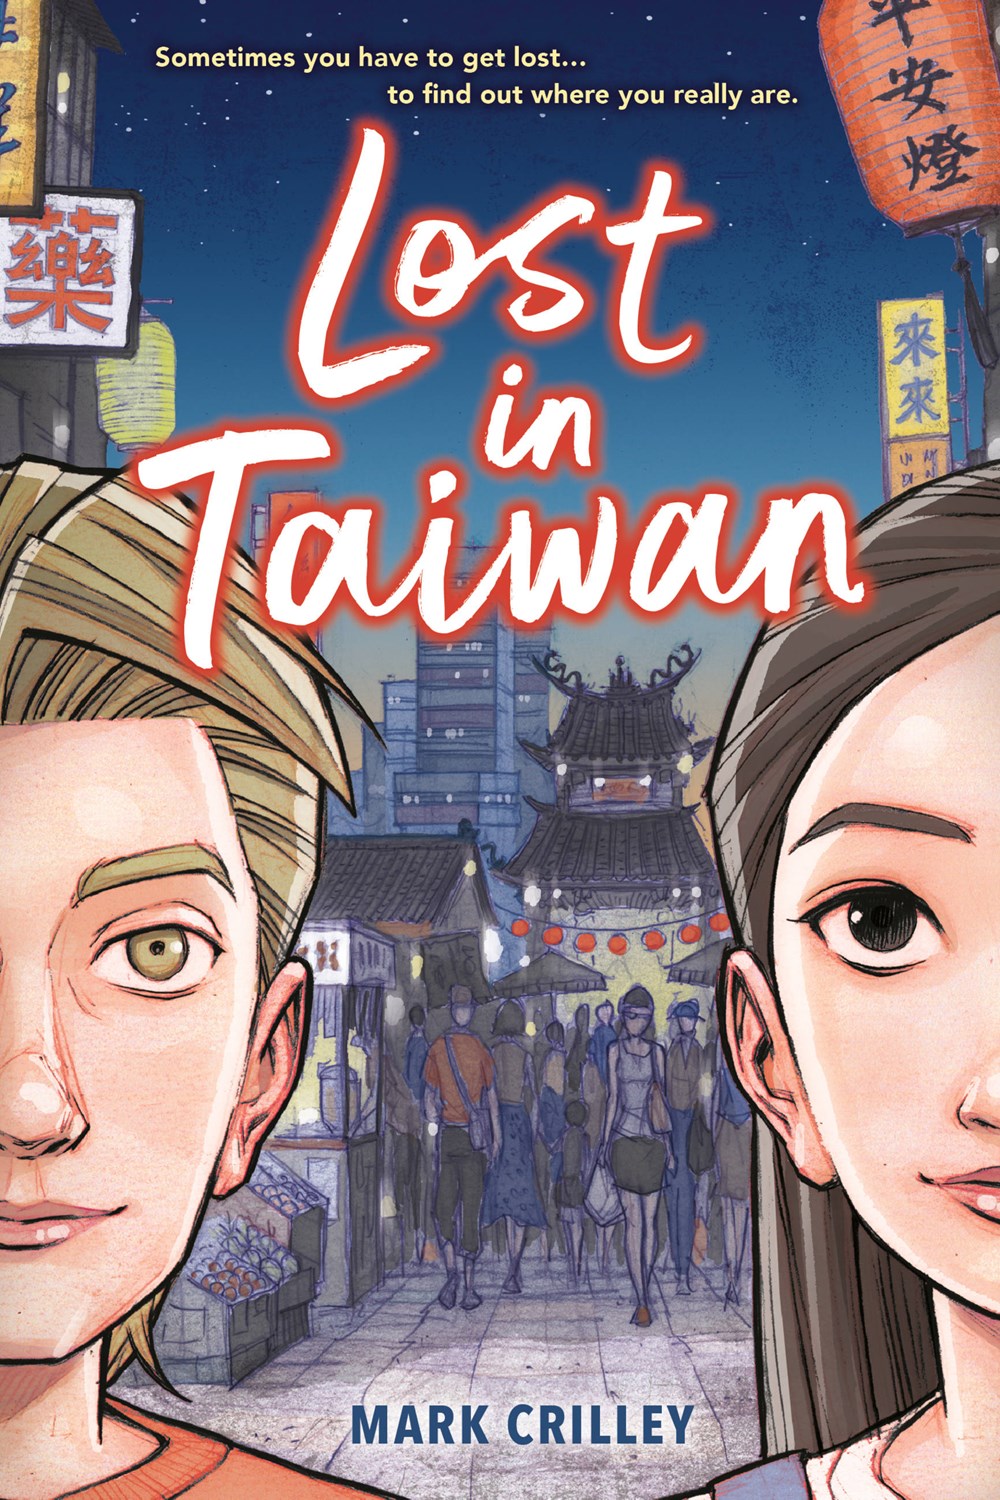 Lost in Taiwan (A Graphic Novel) by Mark Crilley